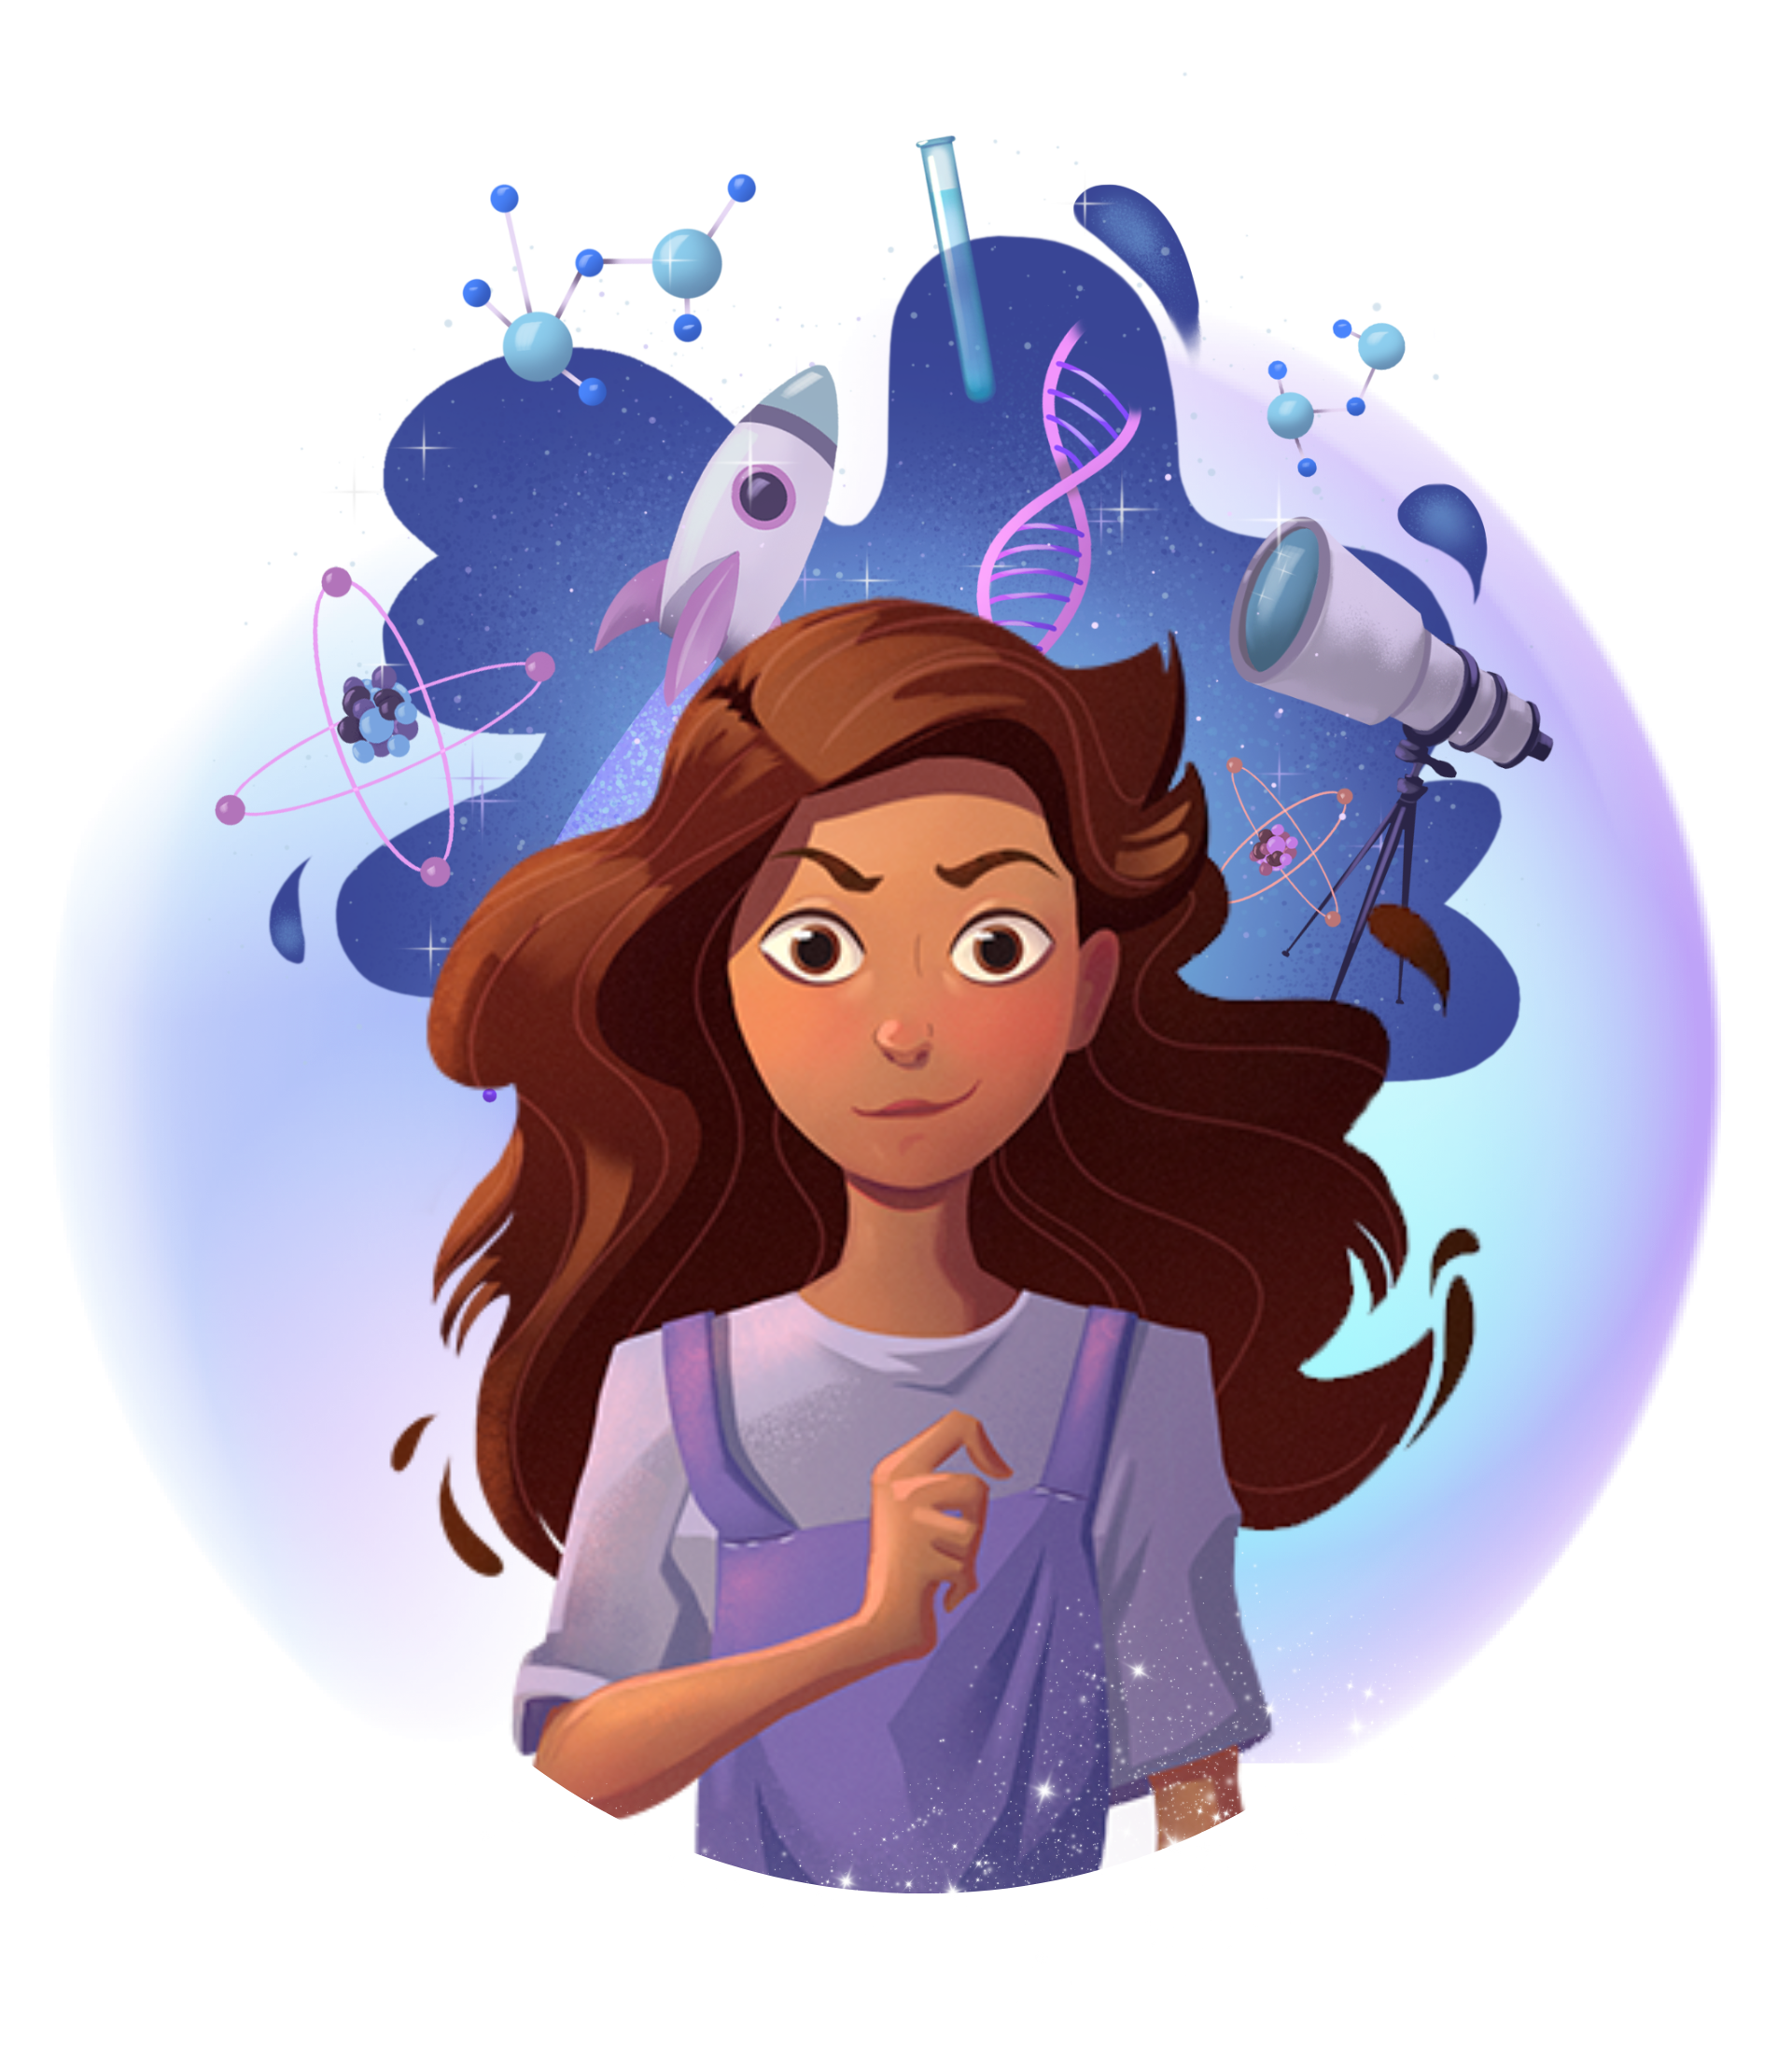 A young girl with brown wavy hair and a purple jumpsuit smiles as Erandi, Erandi Aprende's friendly AI STEAM buddy, sparks curiosity about science, technology and beyond. (Whimsical STEAM background with a rocket, telescope, stars and atoms).